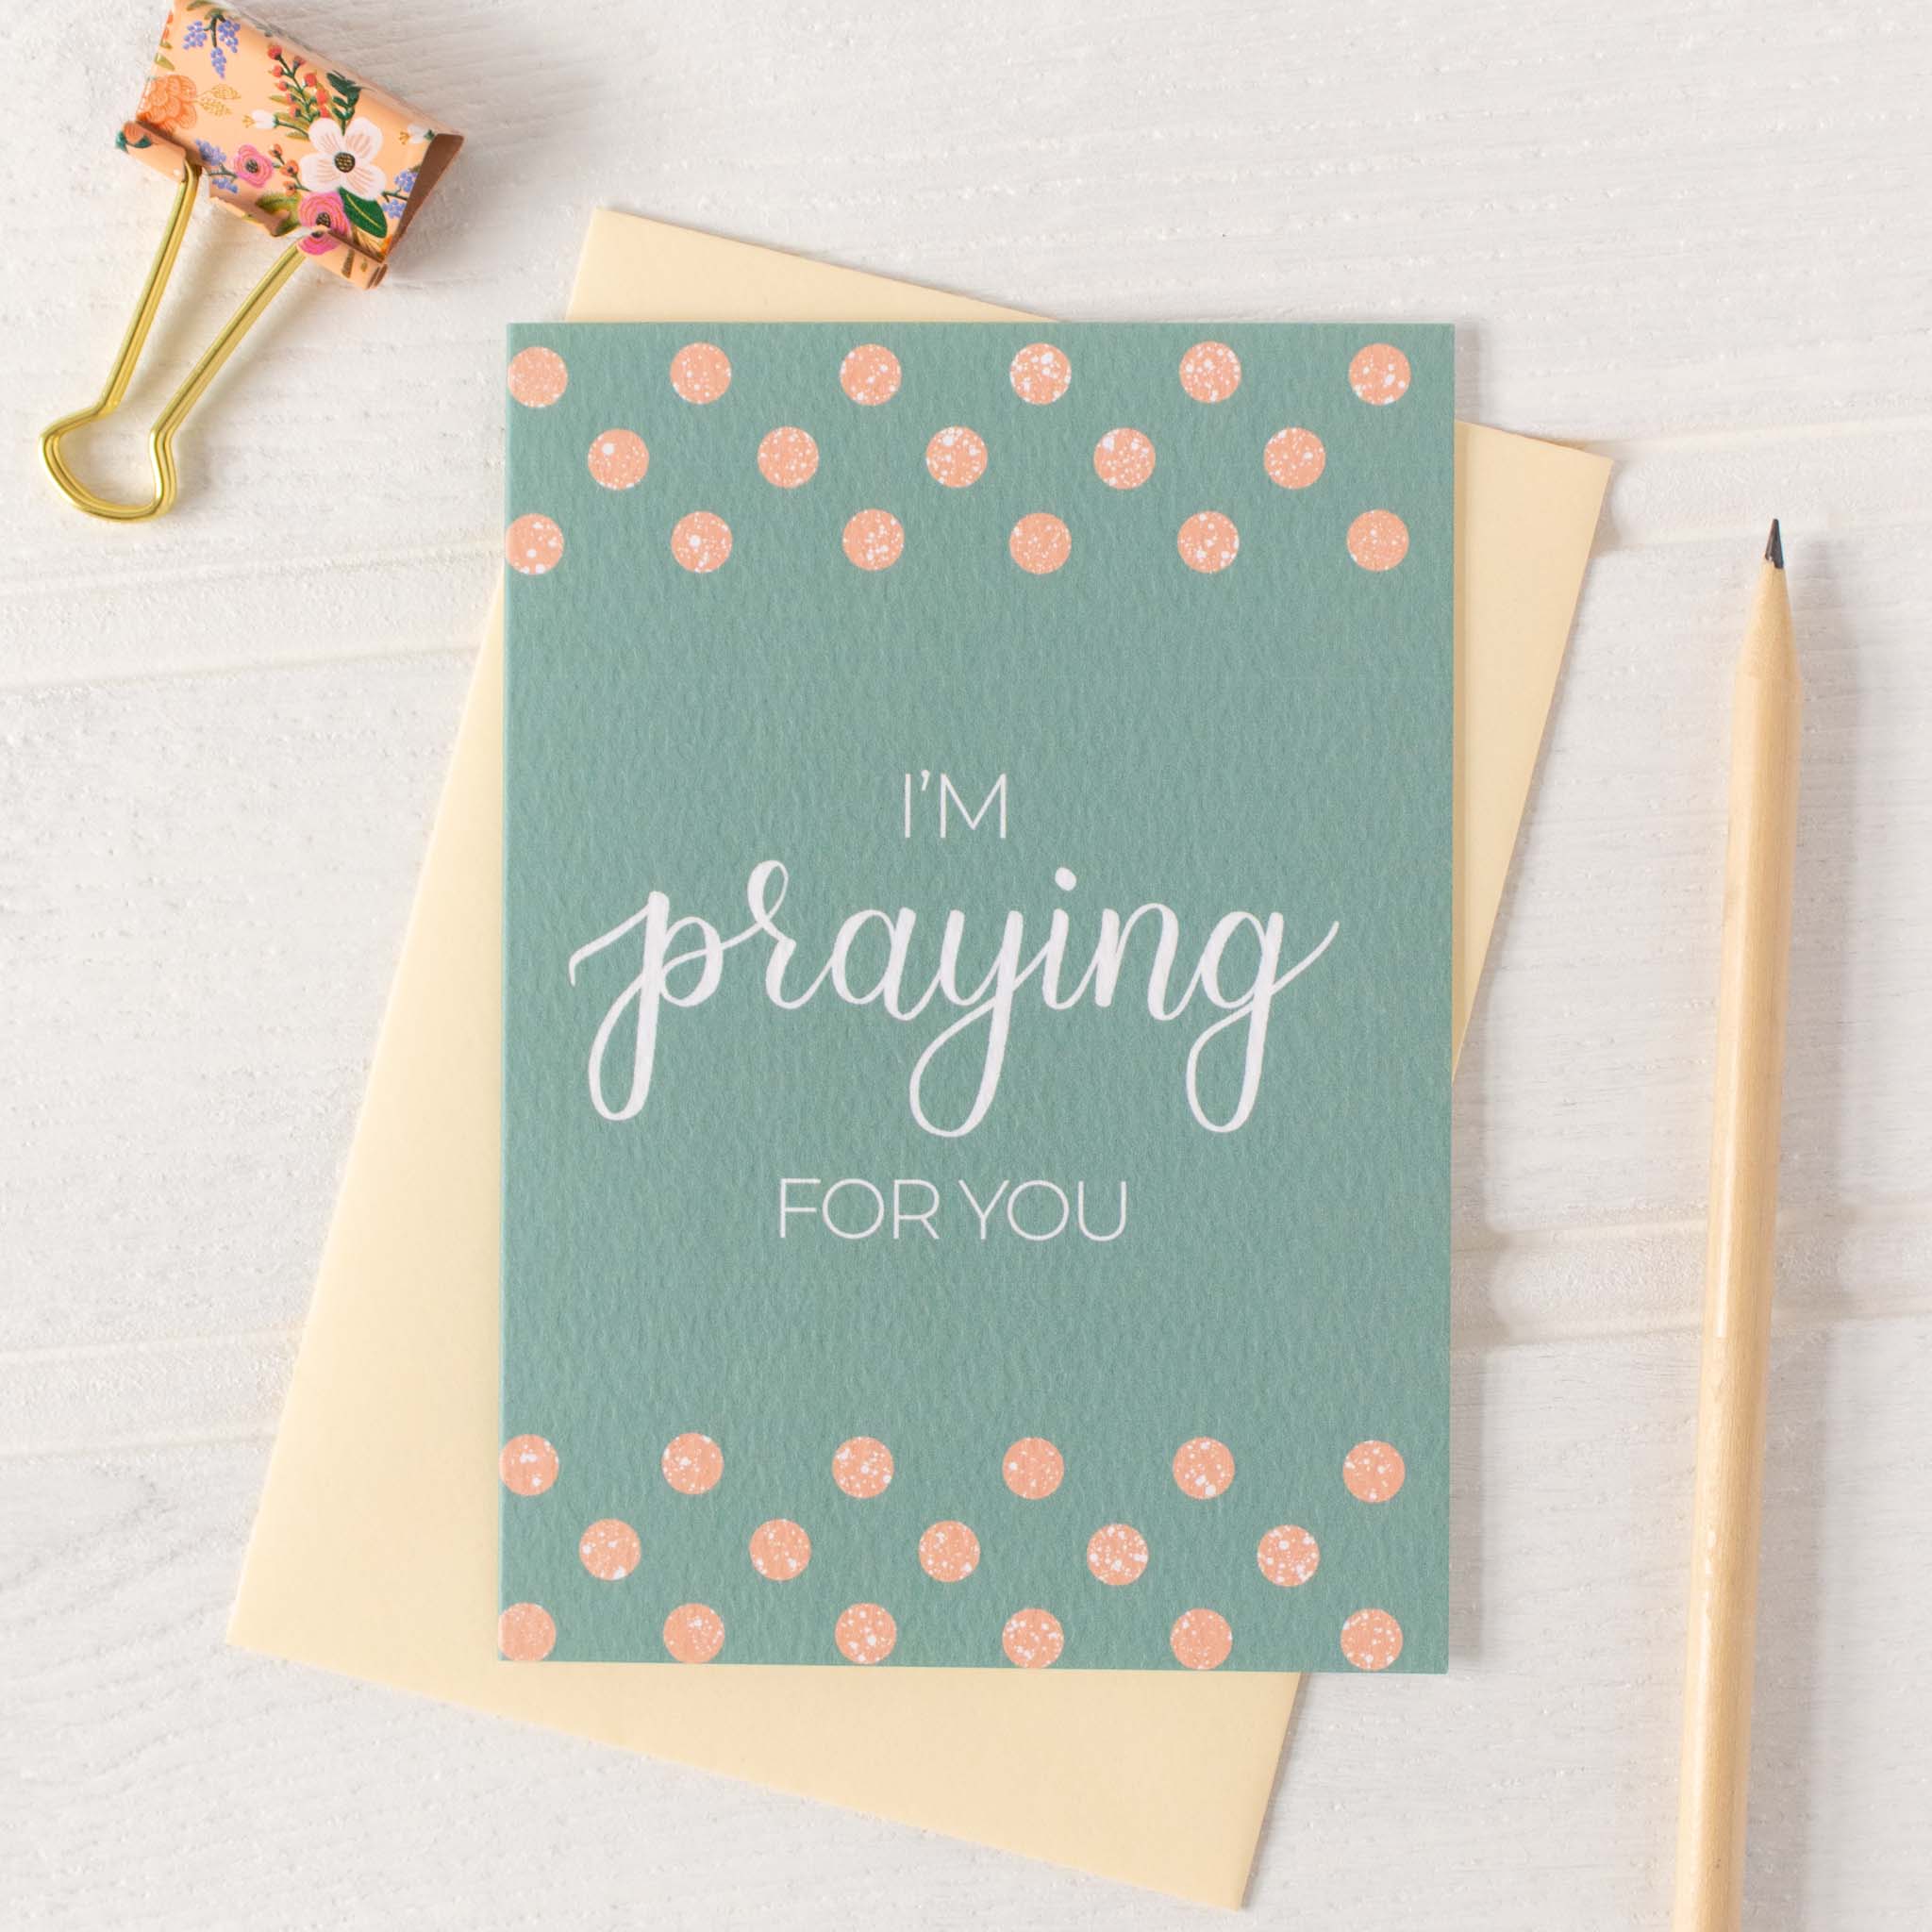 I'm Praying for You Card with envelope